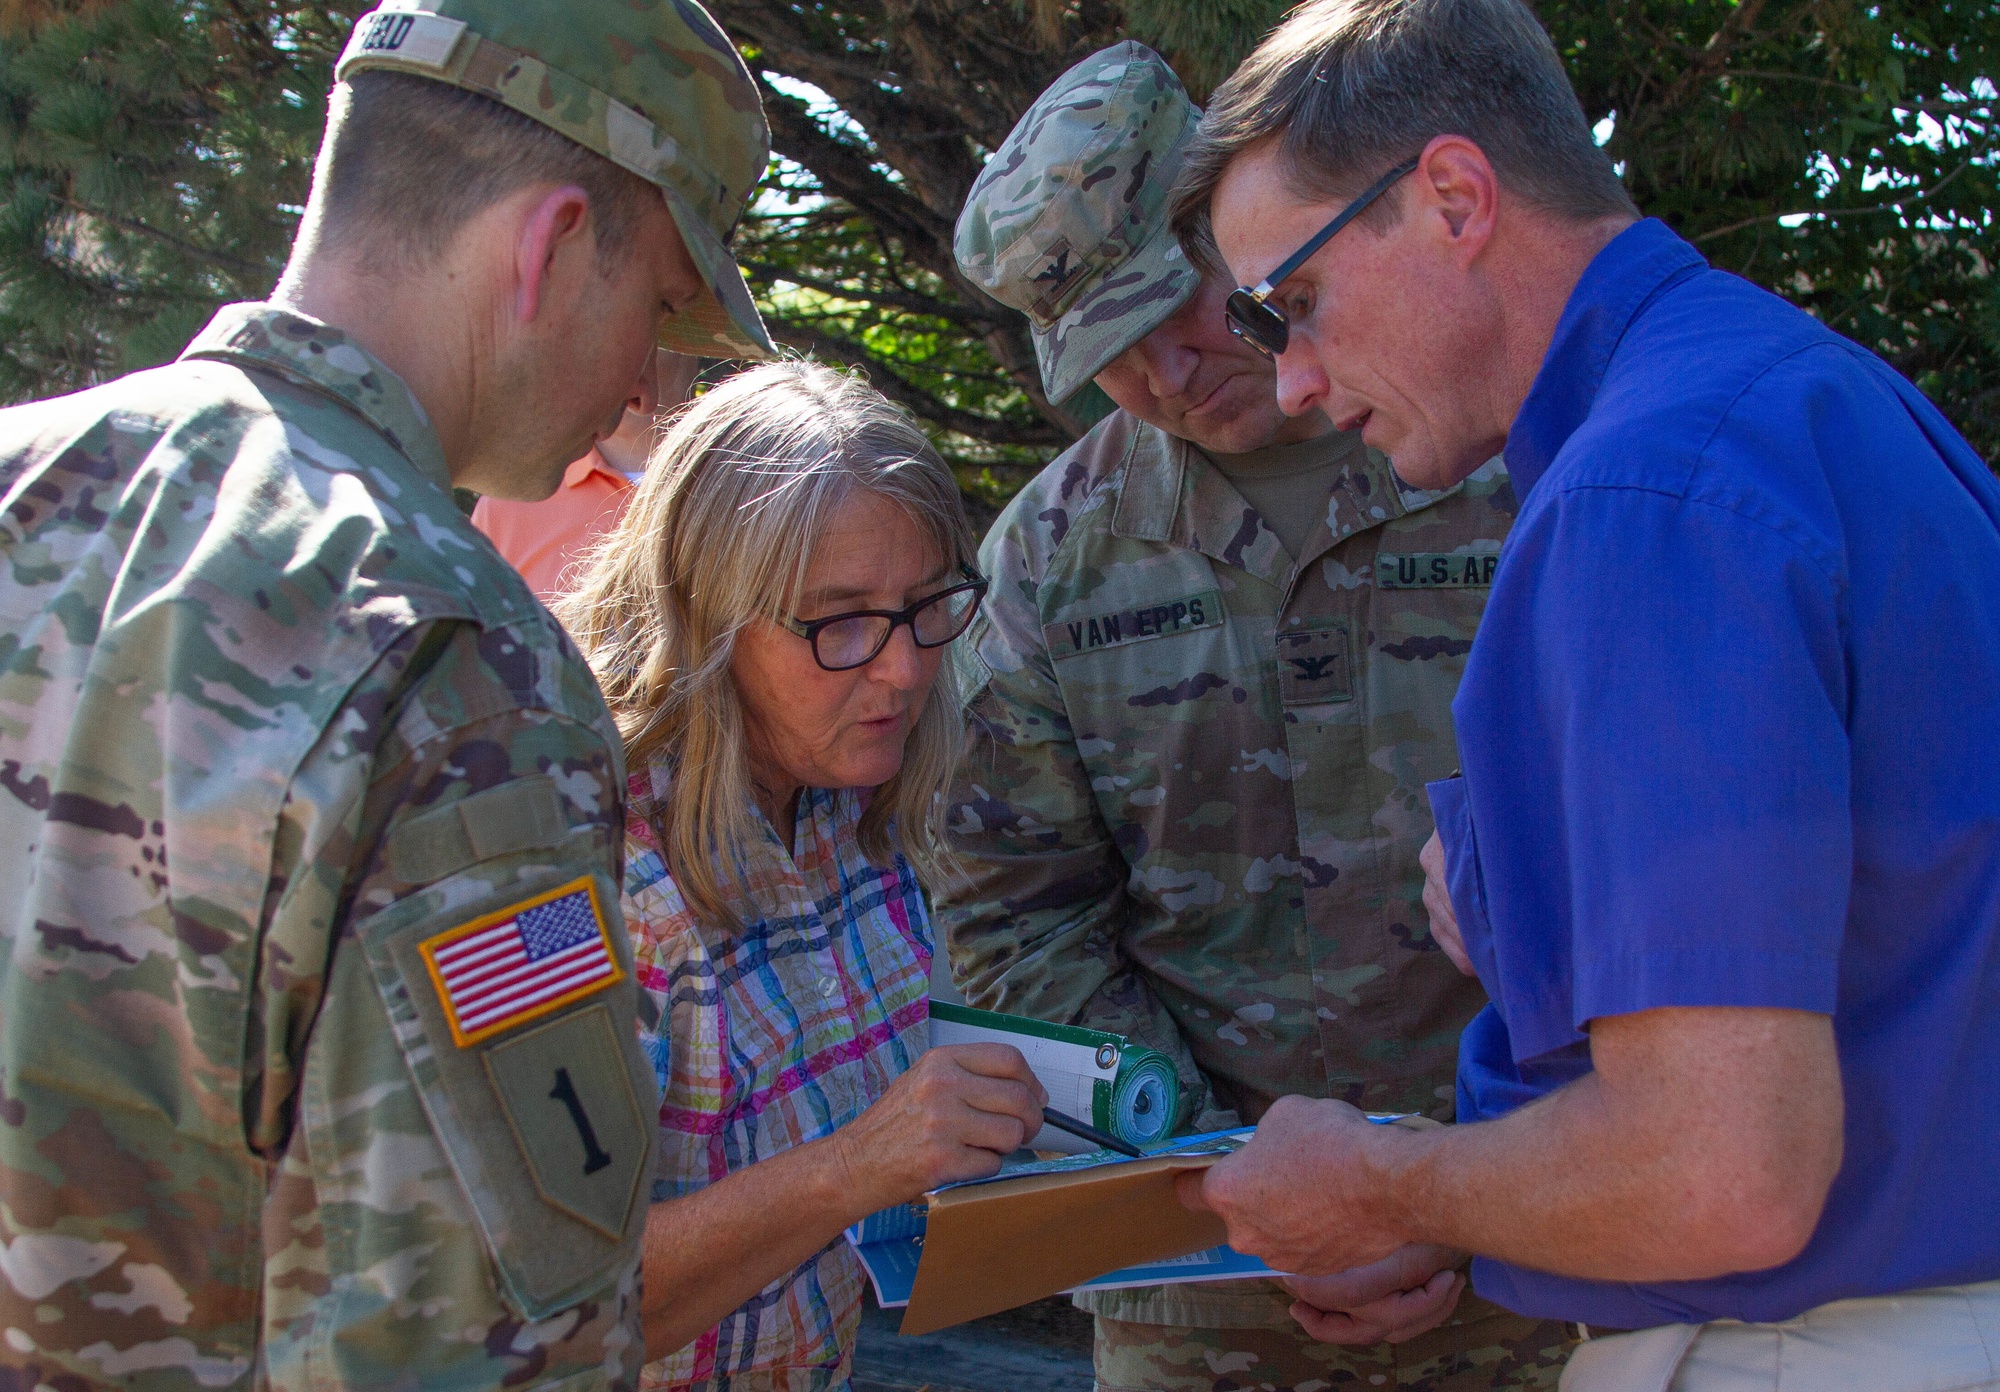 DVIDS - Images - Col. Van Epps, Col. Rayfield, Jeff and Martha Tasker examine a map [Image of 9]